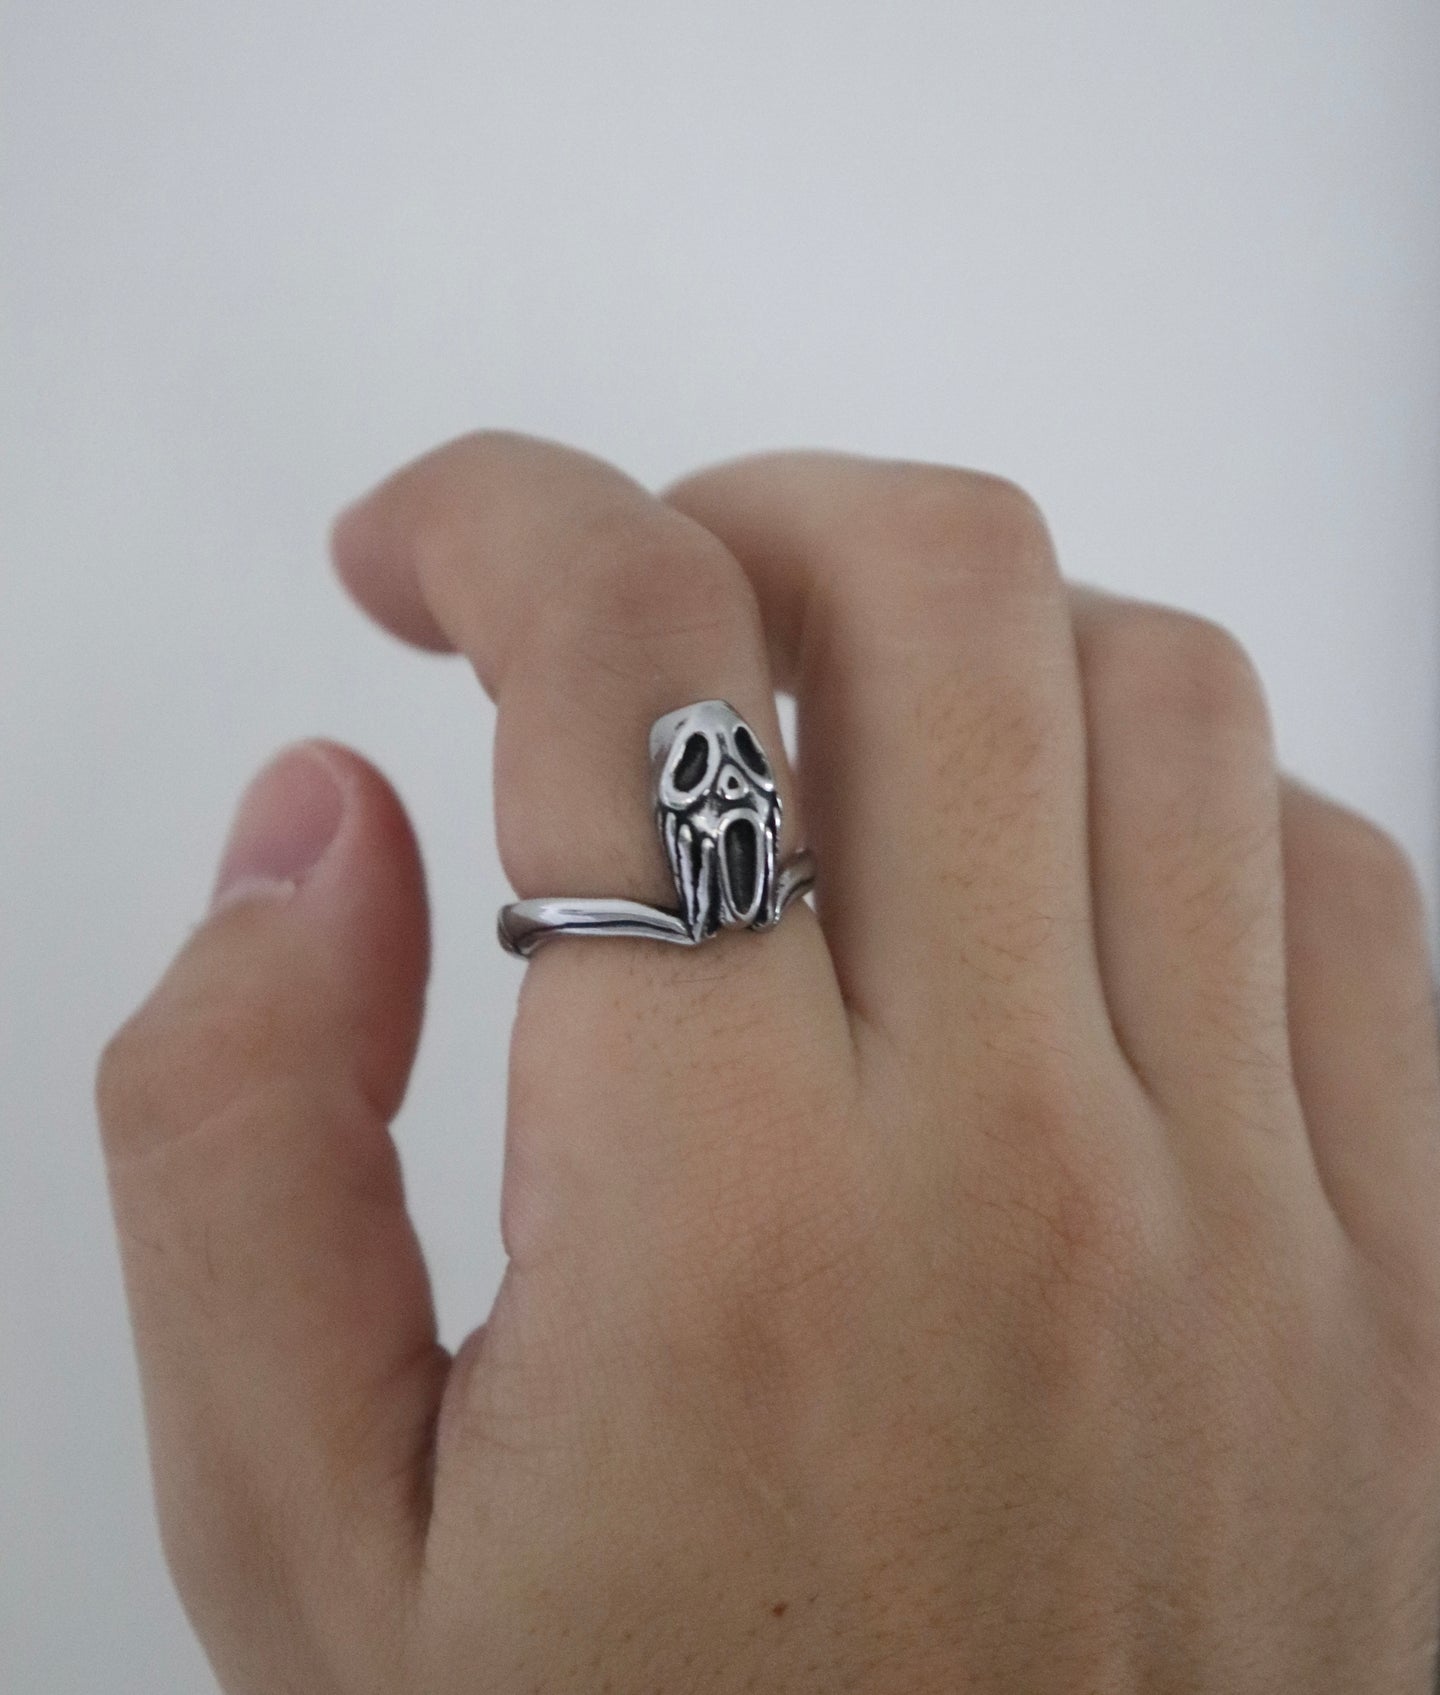 Haunted Face Ring - Fashion Jewelry by Yordy.